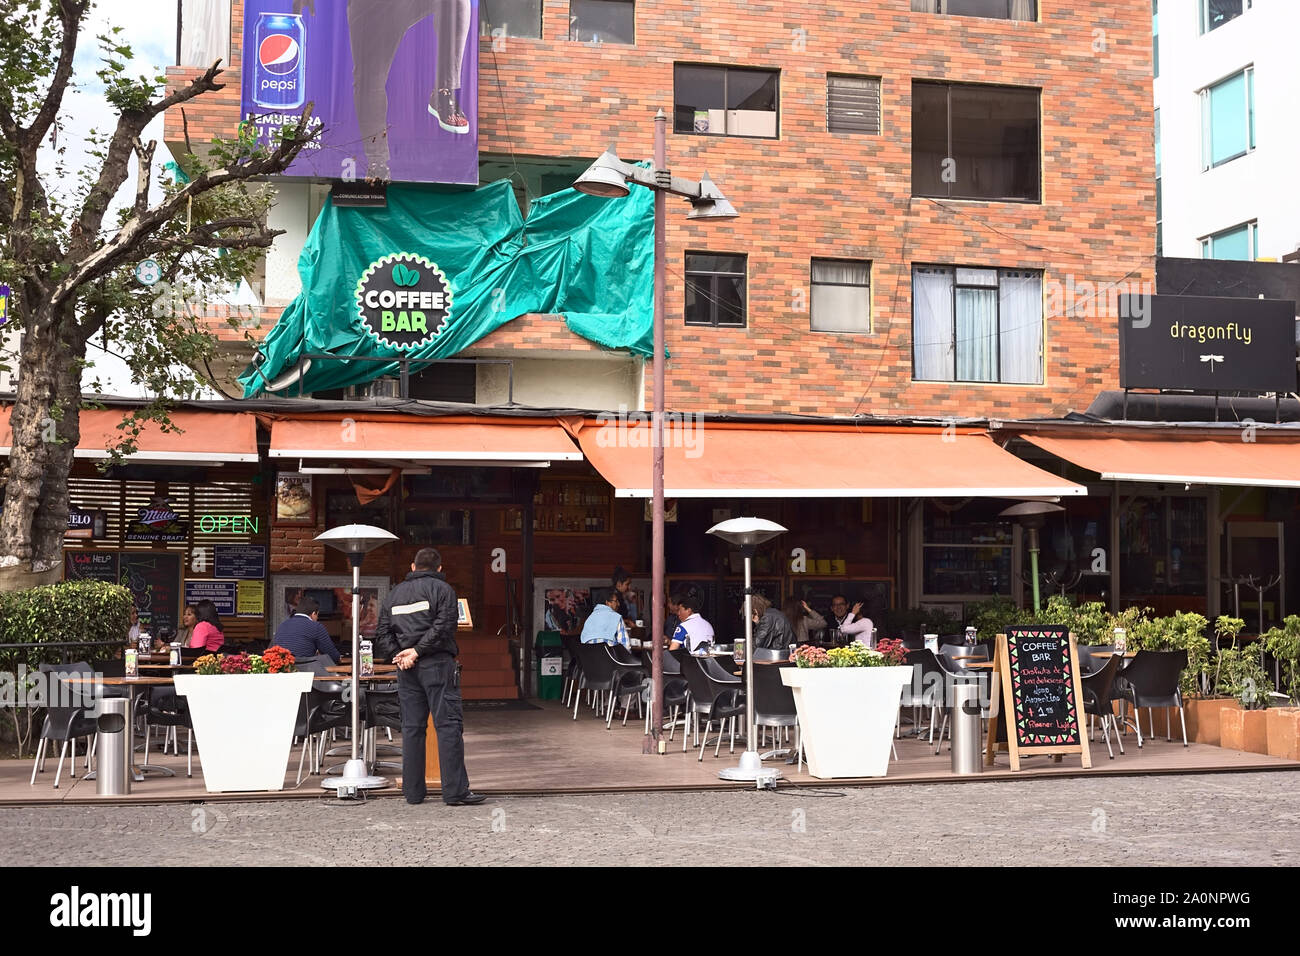 QUITO, ECUADOR - AUGUST 6, 2014: Outdoor sitting area of the Coffee Bar restaurant on Plaza Foch in the tourist district La Mariscal in Quito, Ecuador Stock Photo